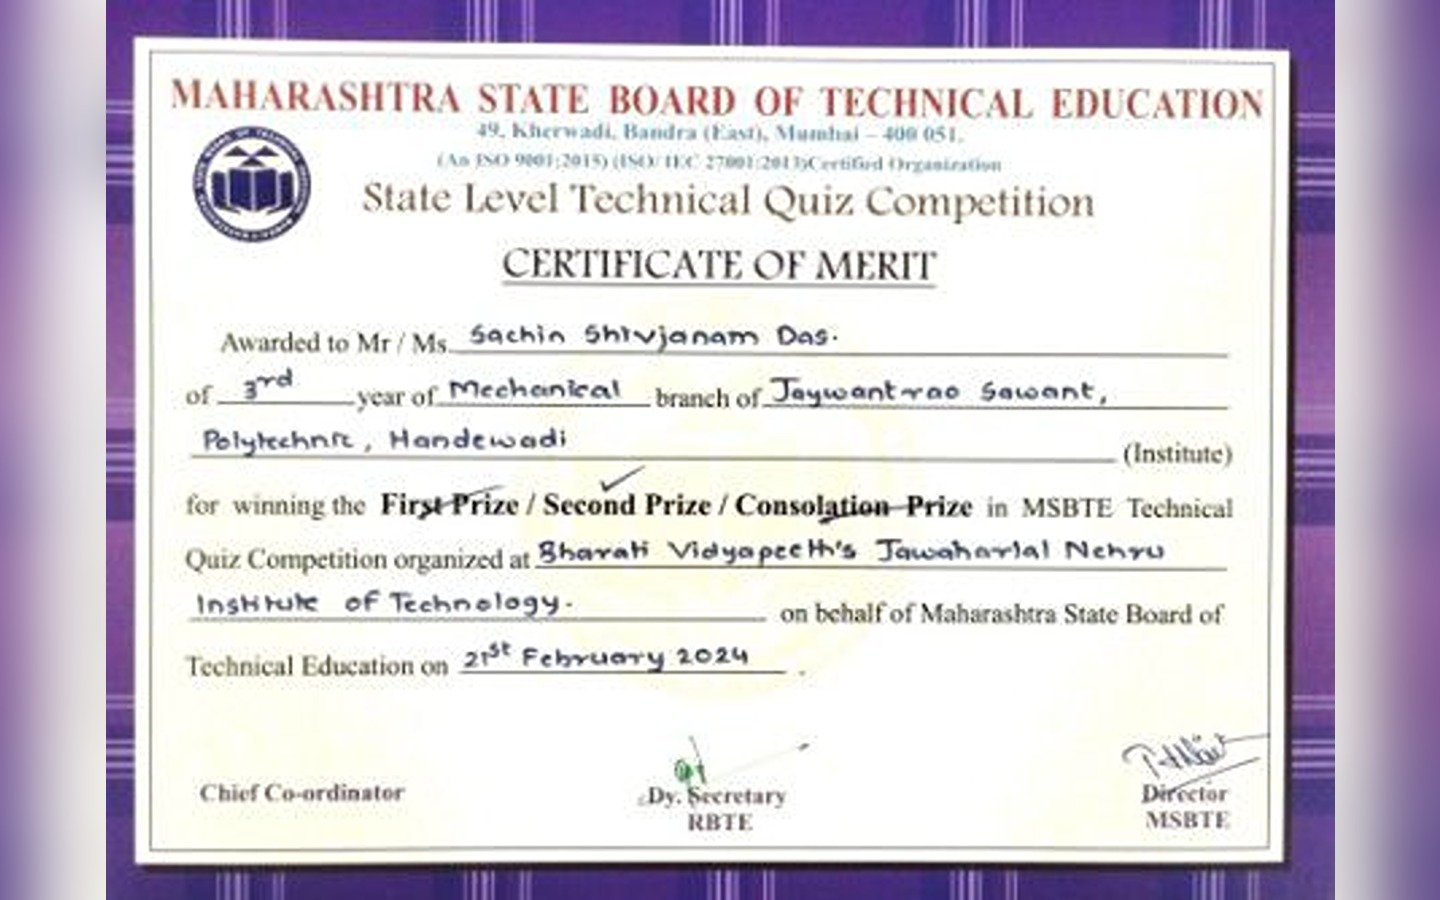 MSBTE Sponsored State Level Technical Quiz Competition 2024